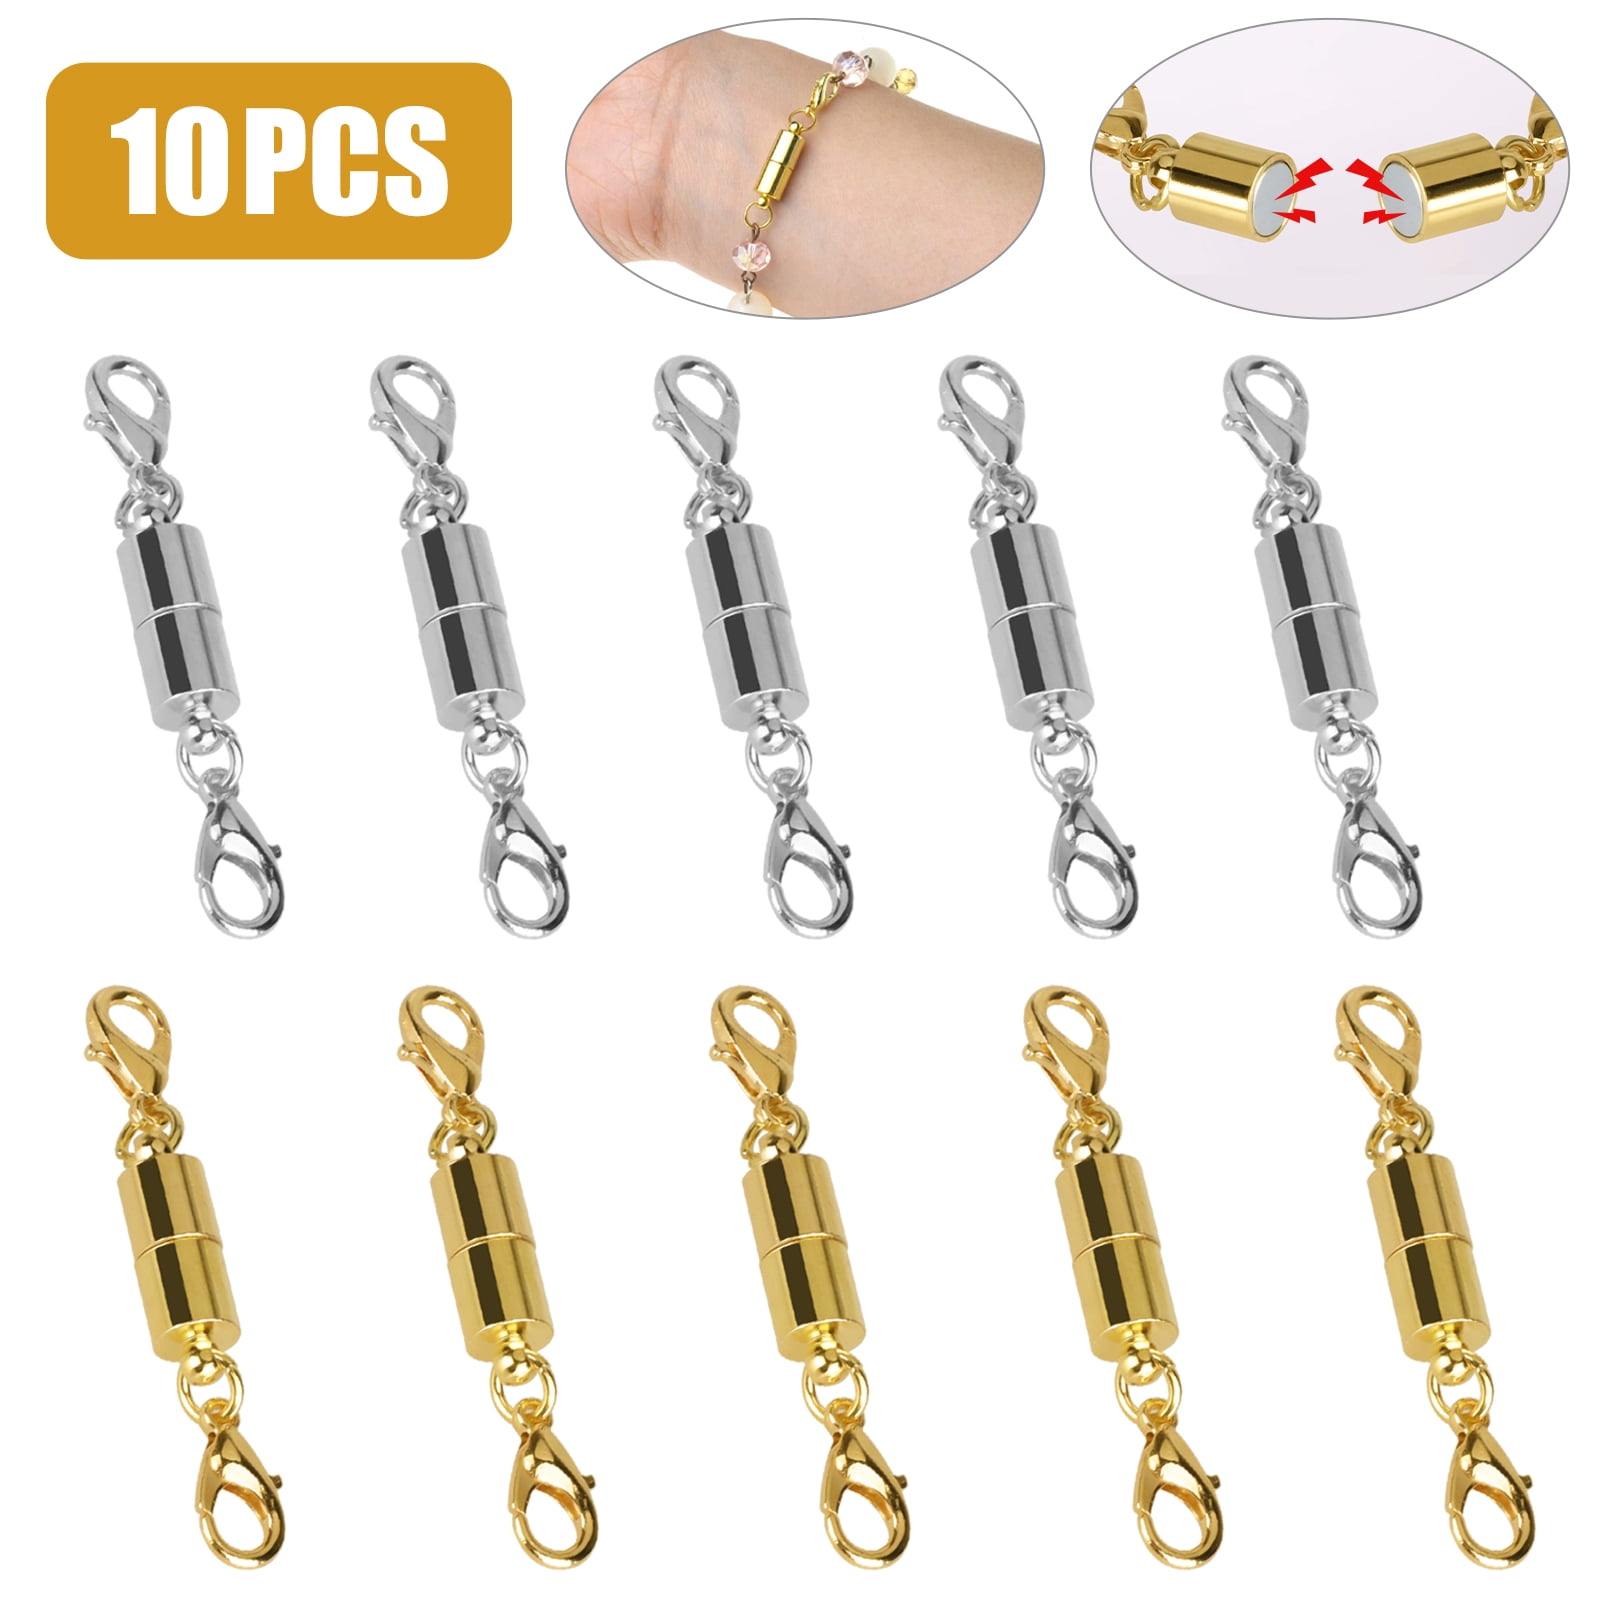 6 Pcs Magnetic Necklace Clasps and Closures Jewelry Lobster Clasps